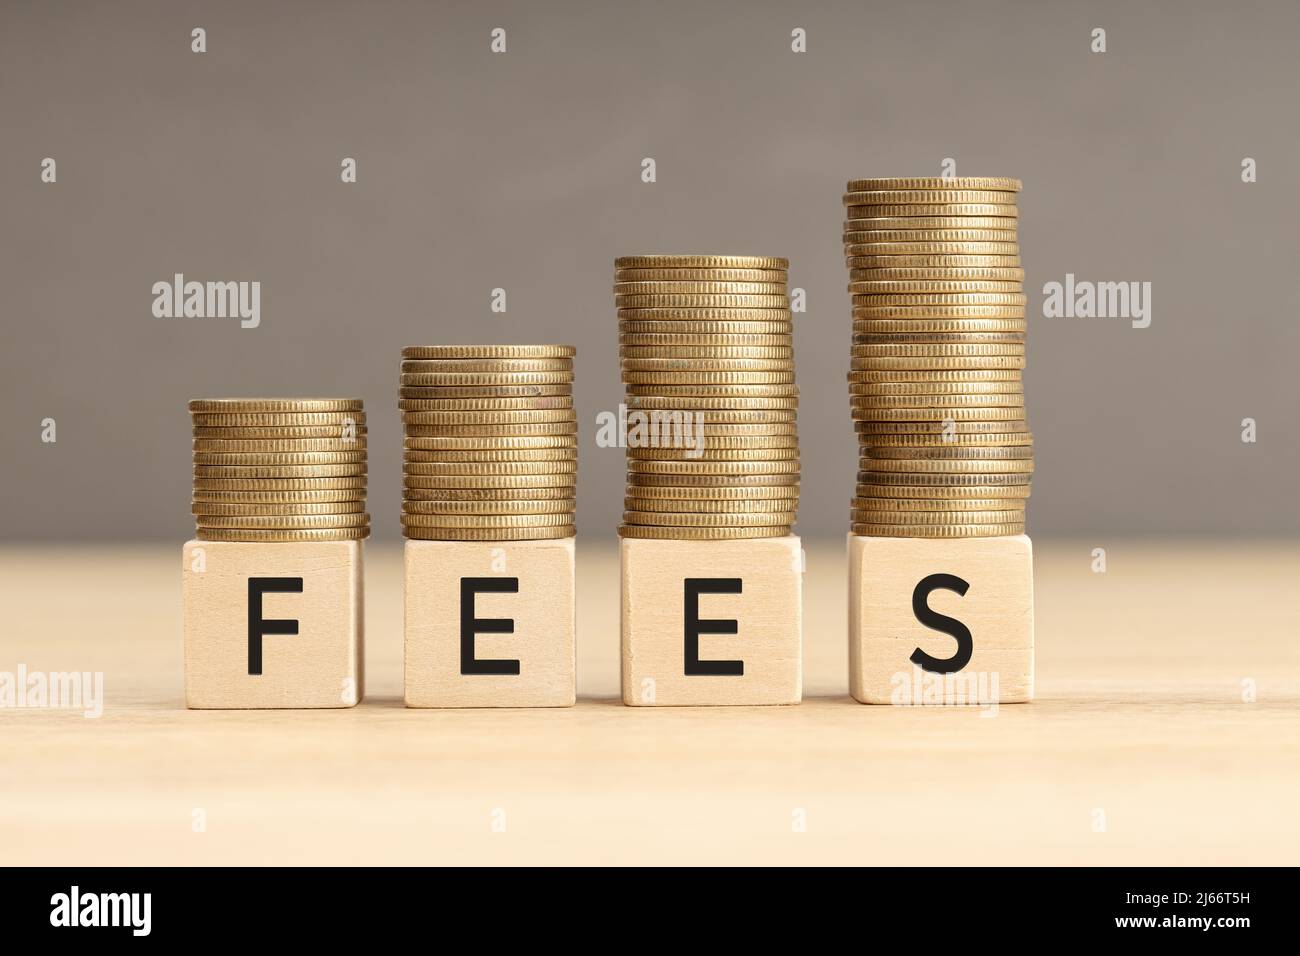 Fees word in wooden blocks with coins stacked in increasing stacks. Fees increasing concept. Copy space Stock Photo